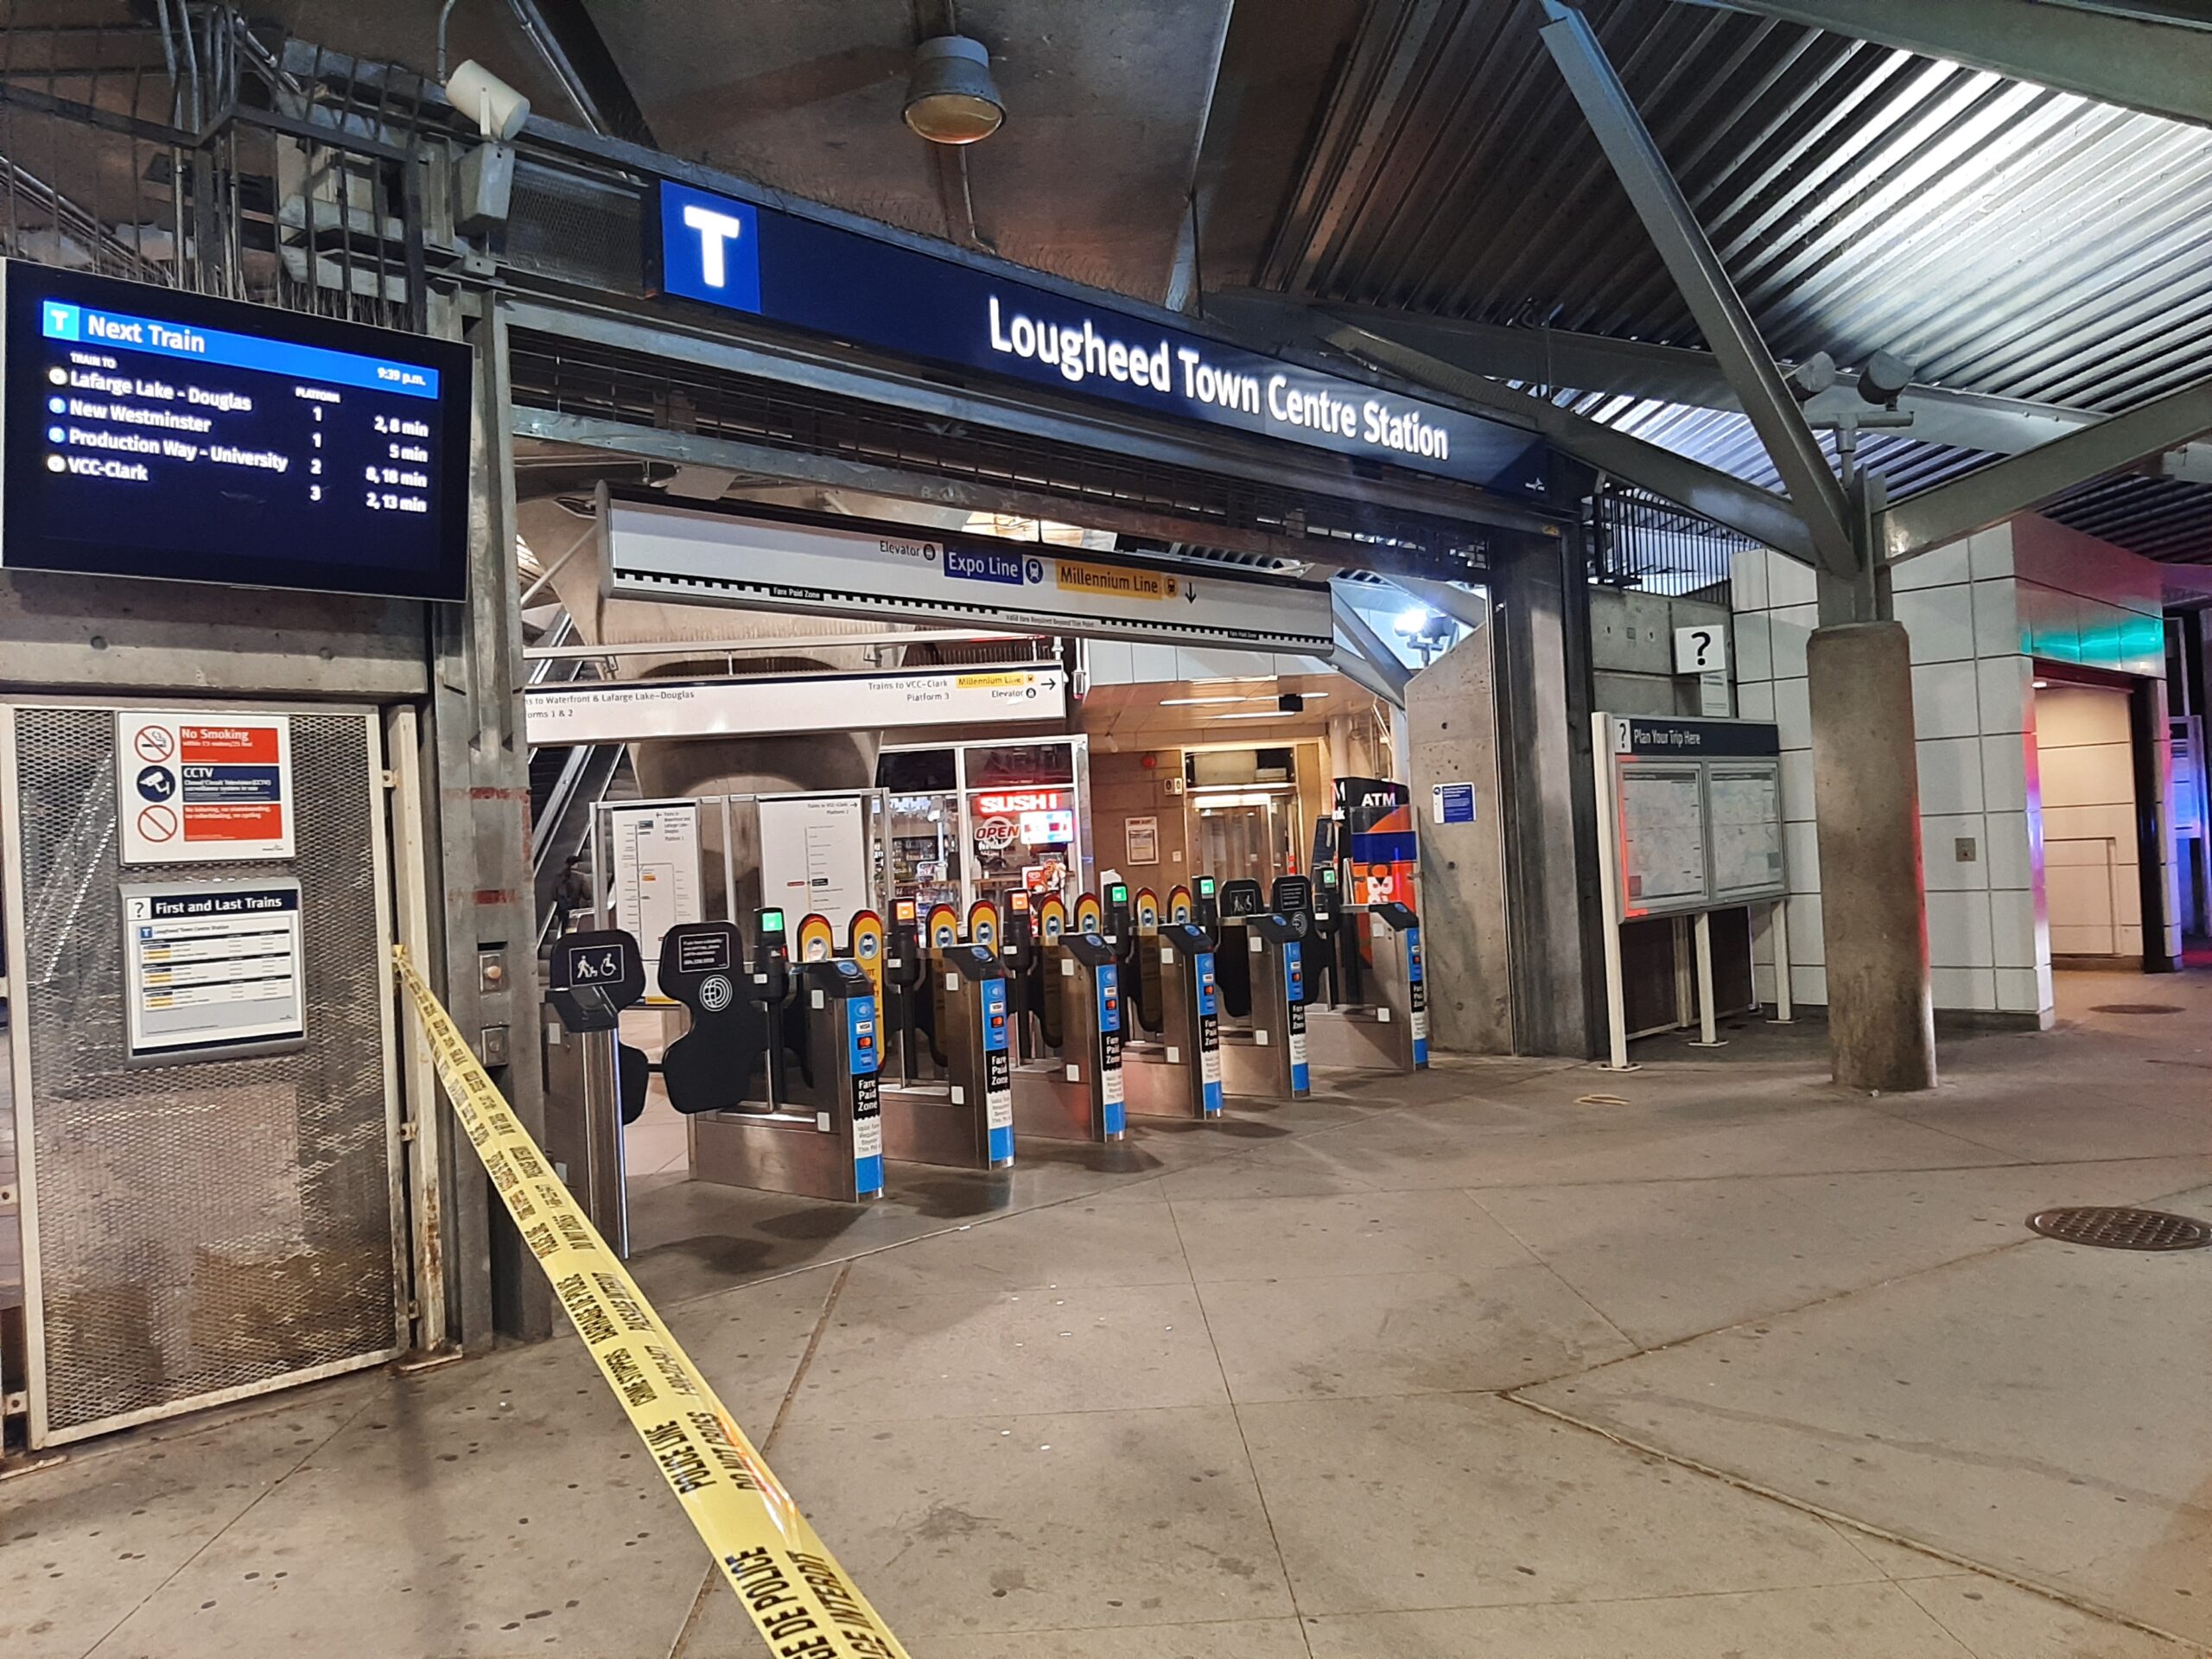 Lougheed Town Centre Station